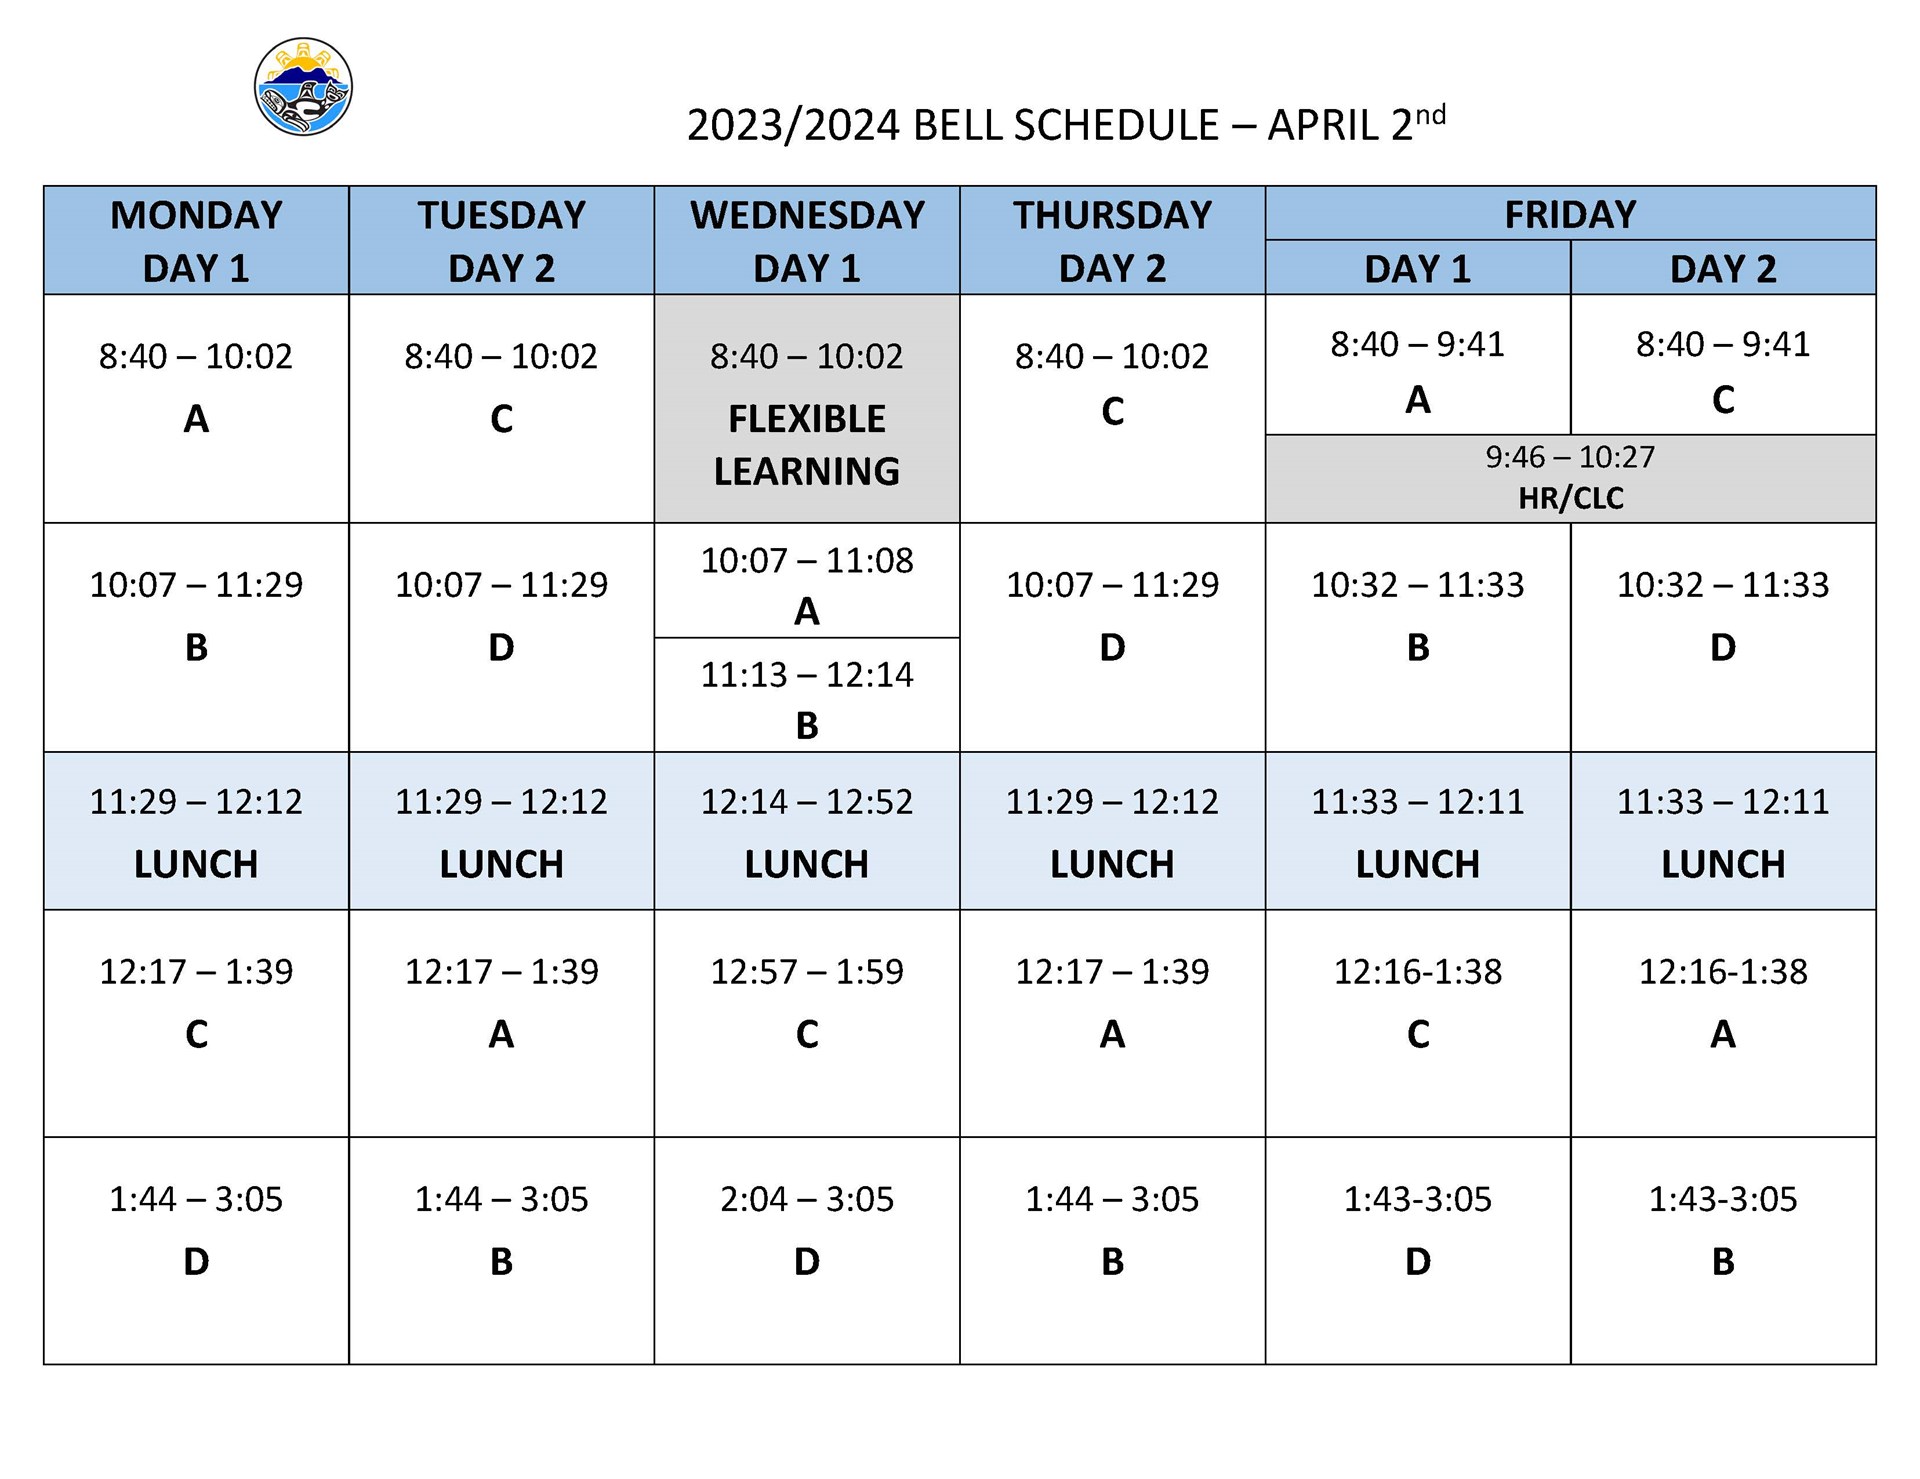 Bell Schedule 2023-2024 - April 2nd_Page_1.jpg